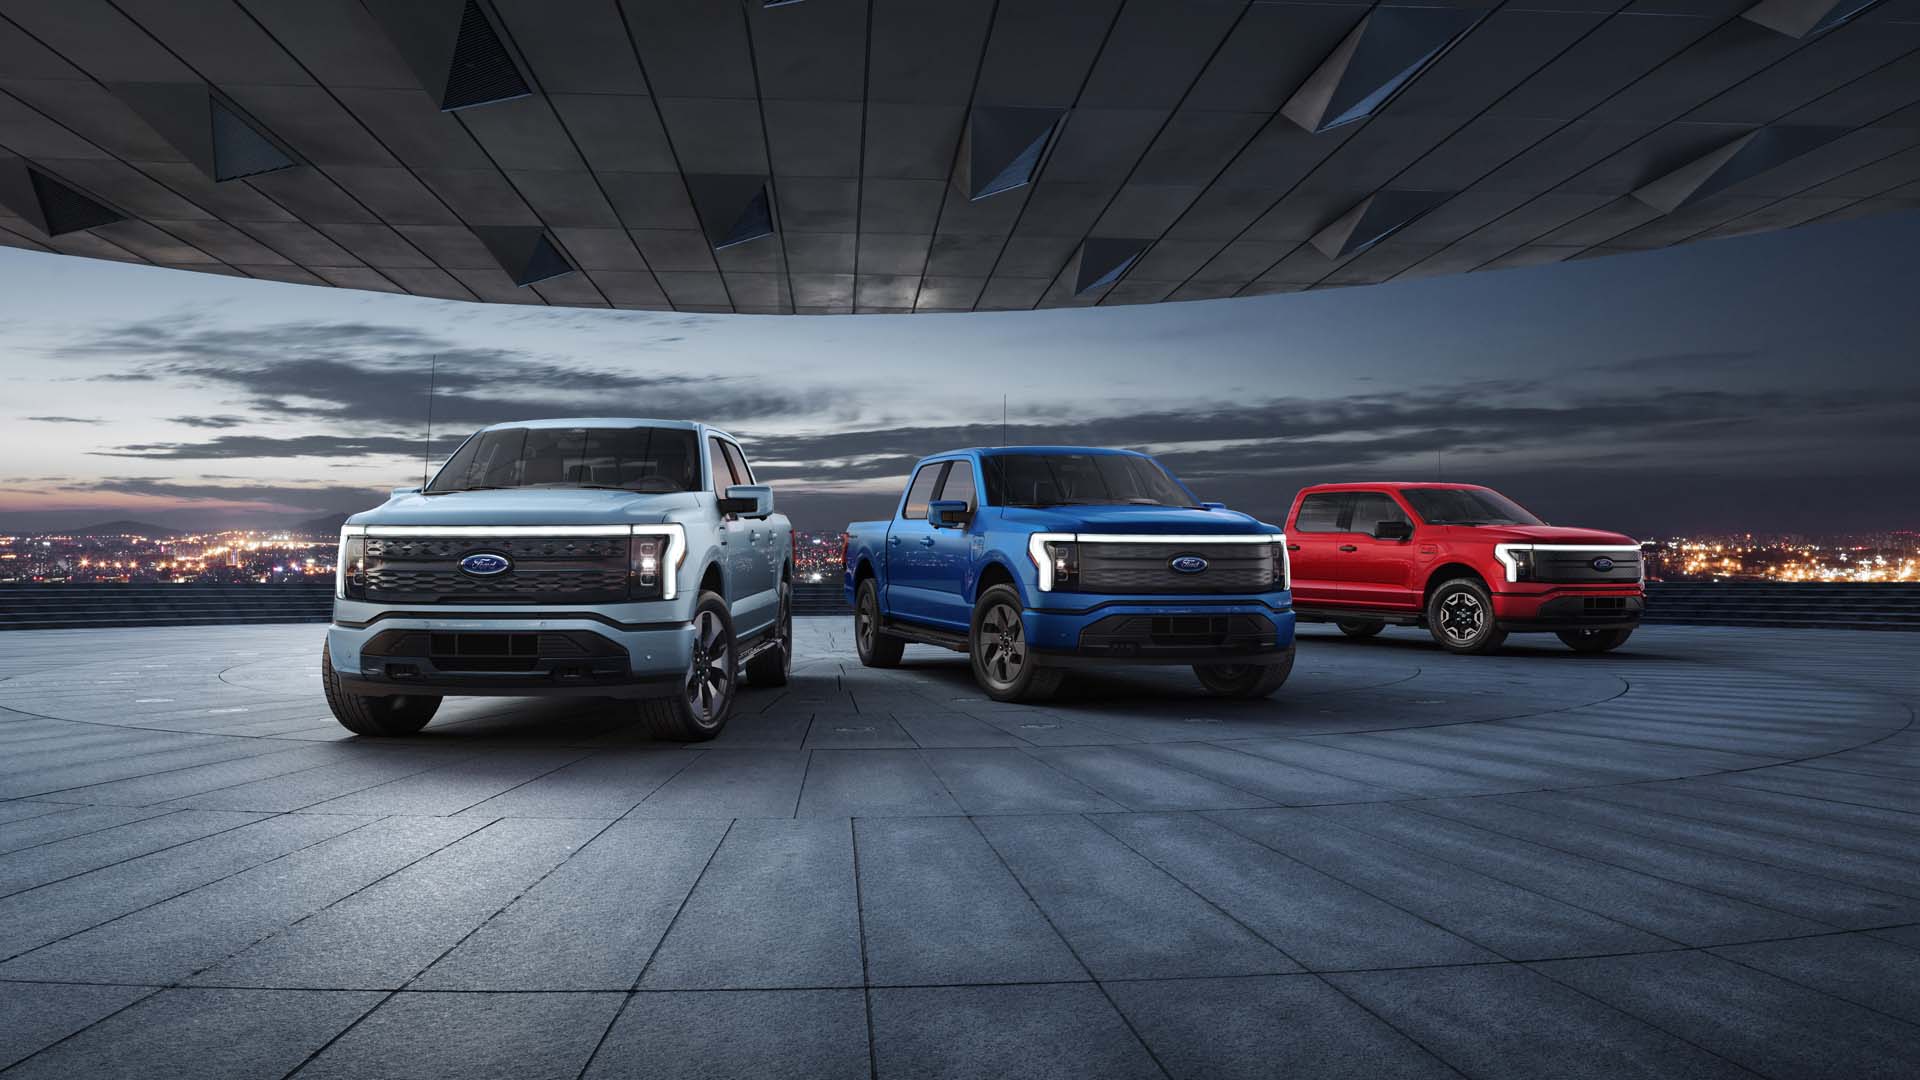 Ford F-150 Lightning production target reportedly doubles, as electric-truck anticipation buildsFord F-150 Lightning production target reportedly doubles, as electric-truck anticipation builds